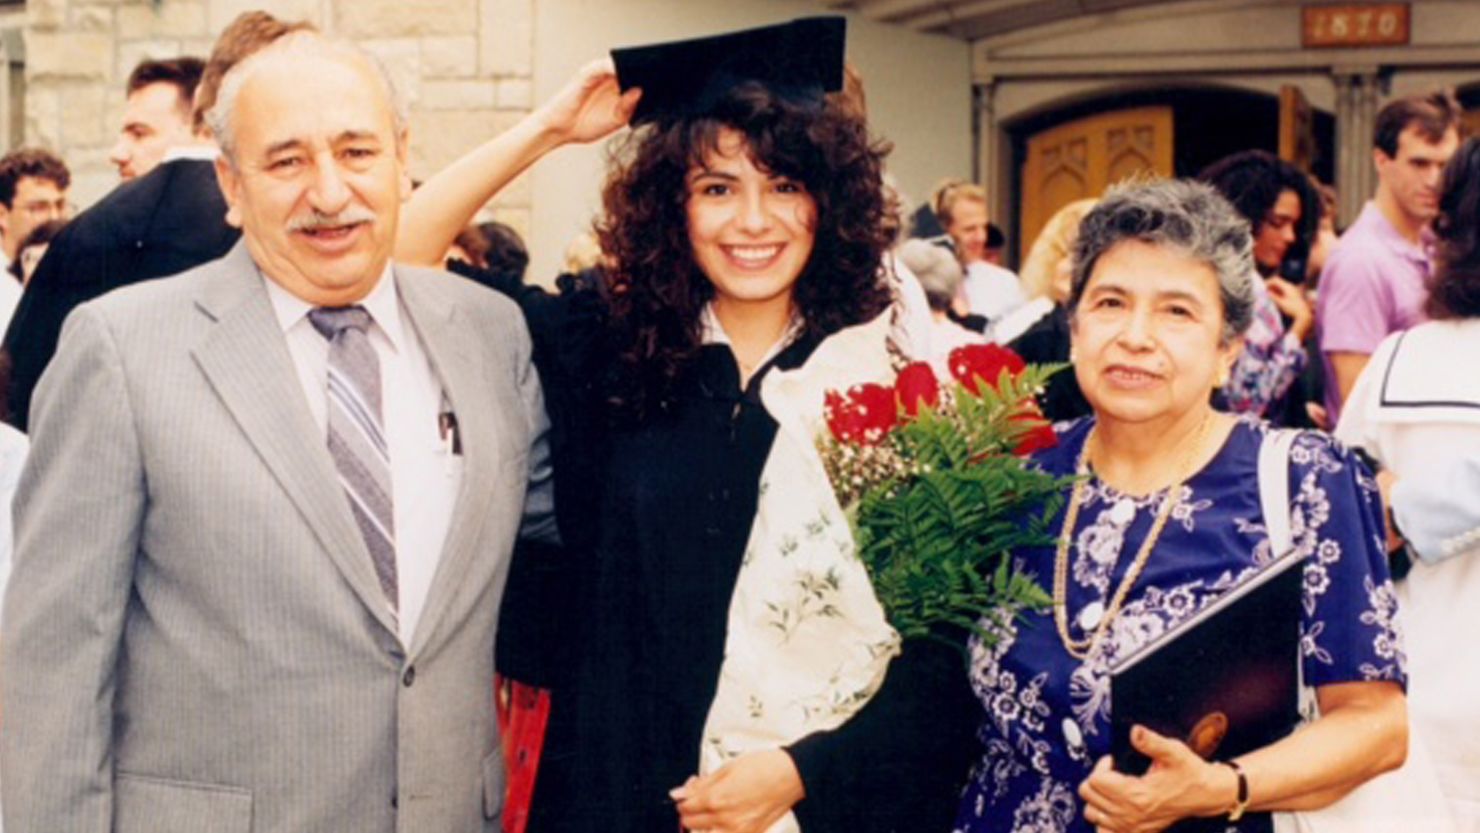 The author with her parents at her graduation from Northwestern University in 1989.